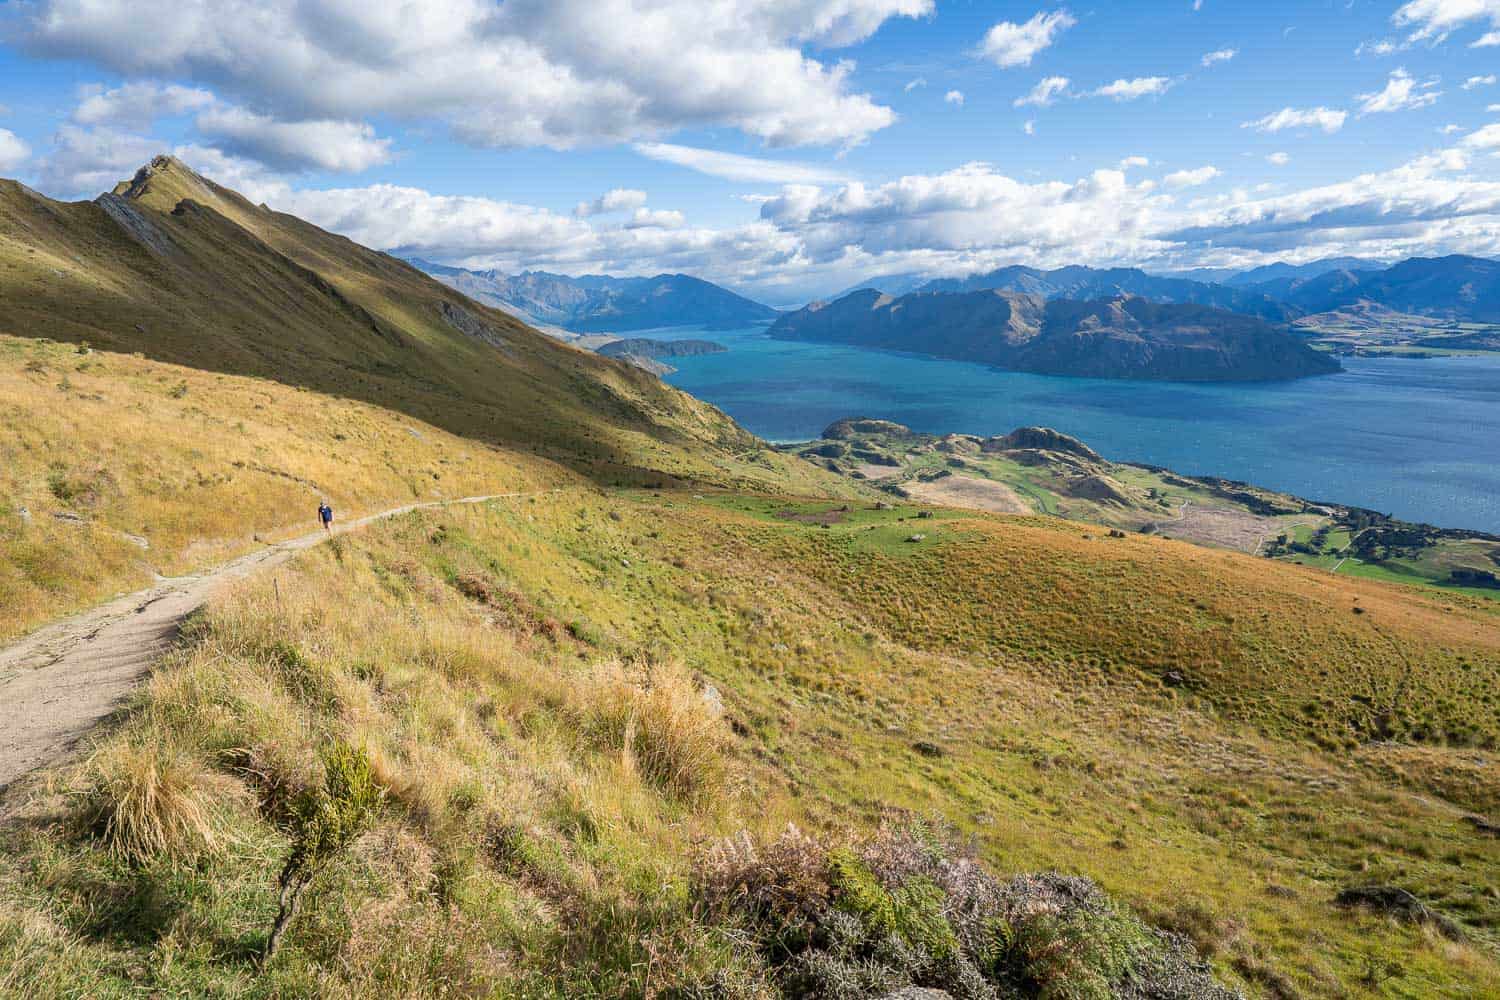 The view on the way up Roy's Peak Track with Lake Wanaka below